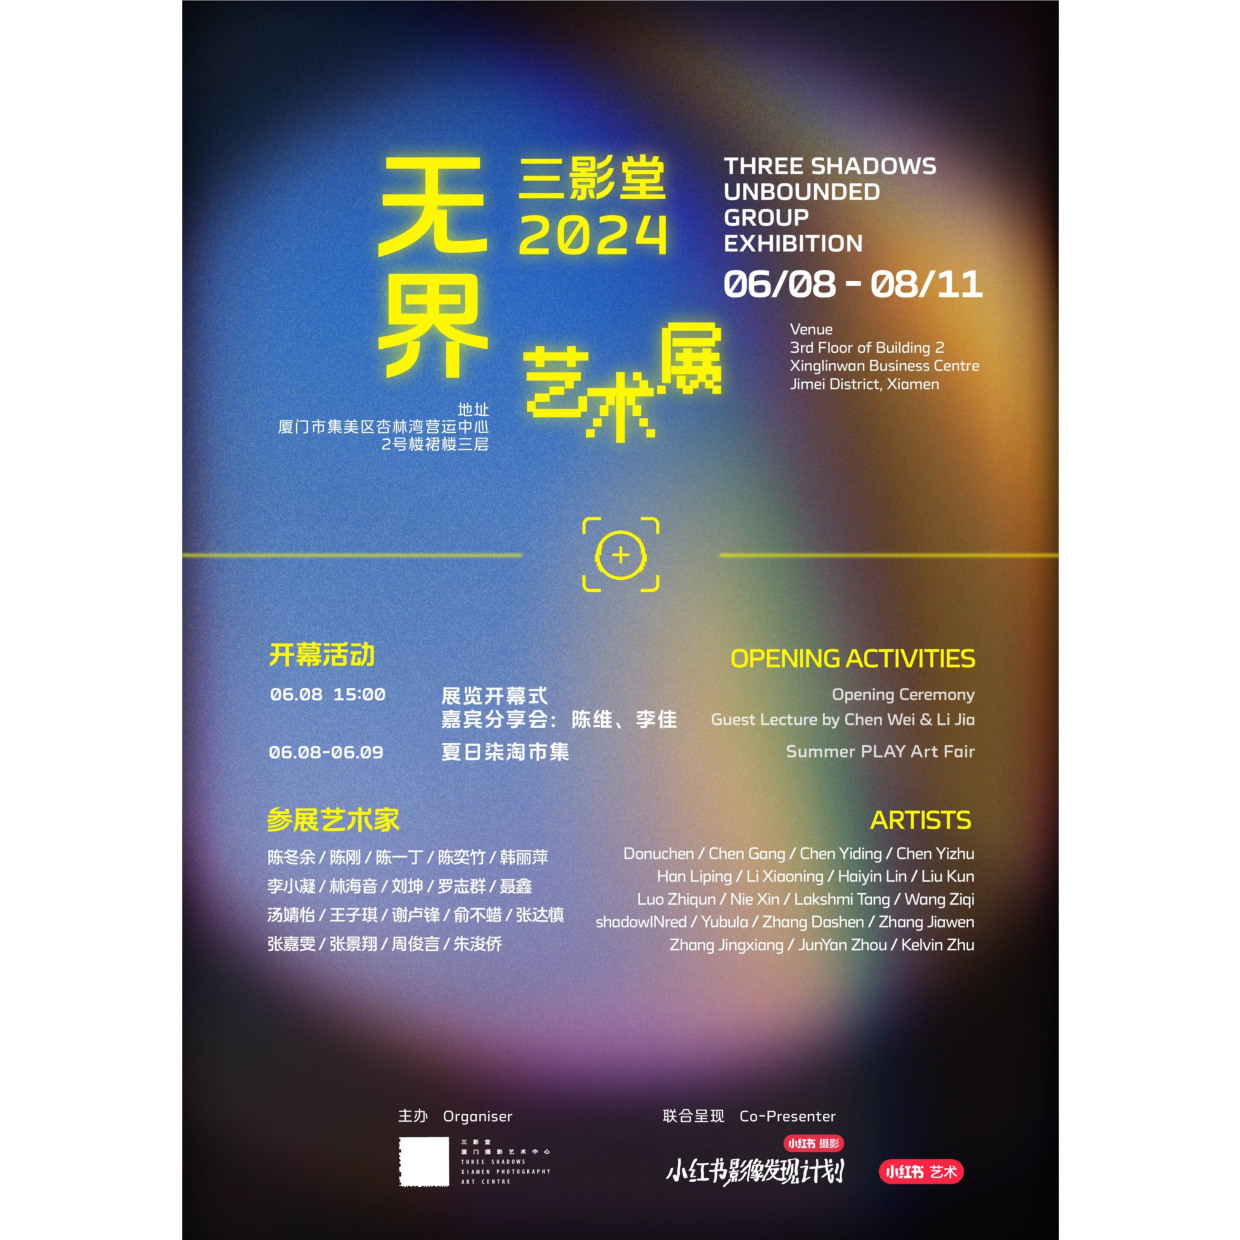 2024 Unbounded Group Exhibition